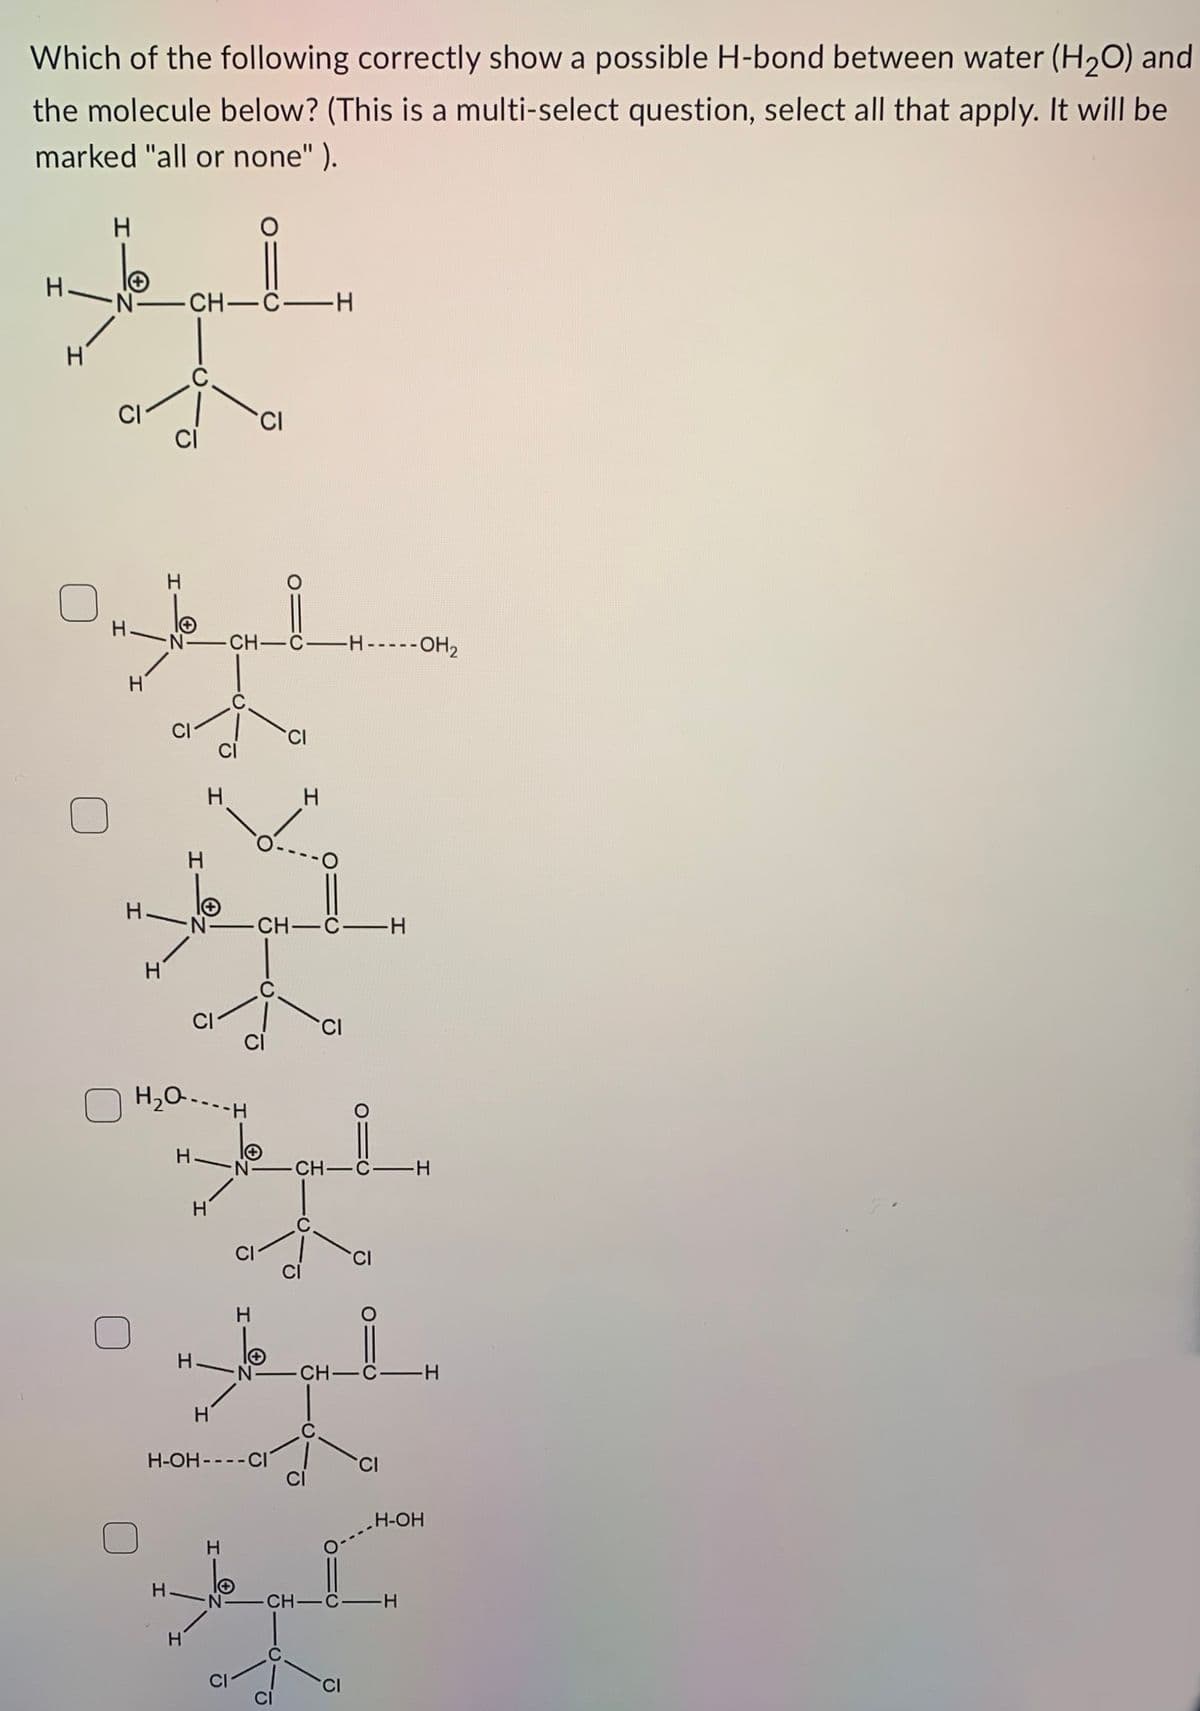 Which of the following correctly show a possible H-bond between water (H₂O) and
the molecule below? (This is a multi-select question, select all that apply. It will be
marked "all or none").
H
H-N-CH-C-H
H
t
C.
CI
CI
H
H.
-N-
H
H
H₂O..
H.
H
H
CH-C-H- ----OH₂
-N-CH-C-H
C
H
C
CI
H. -N-CH-C-H
H
H
H-OH----CI
CI
H
----
O
(
Cl
O
N-CH-C-H
CI
CI
CI
-N-CH-C-H
H-OH